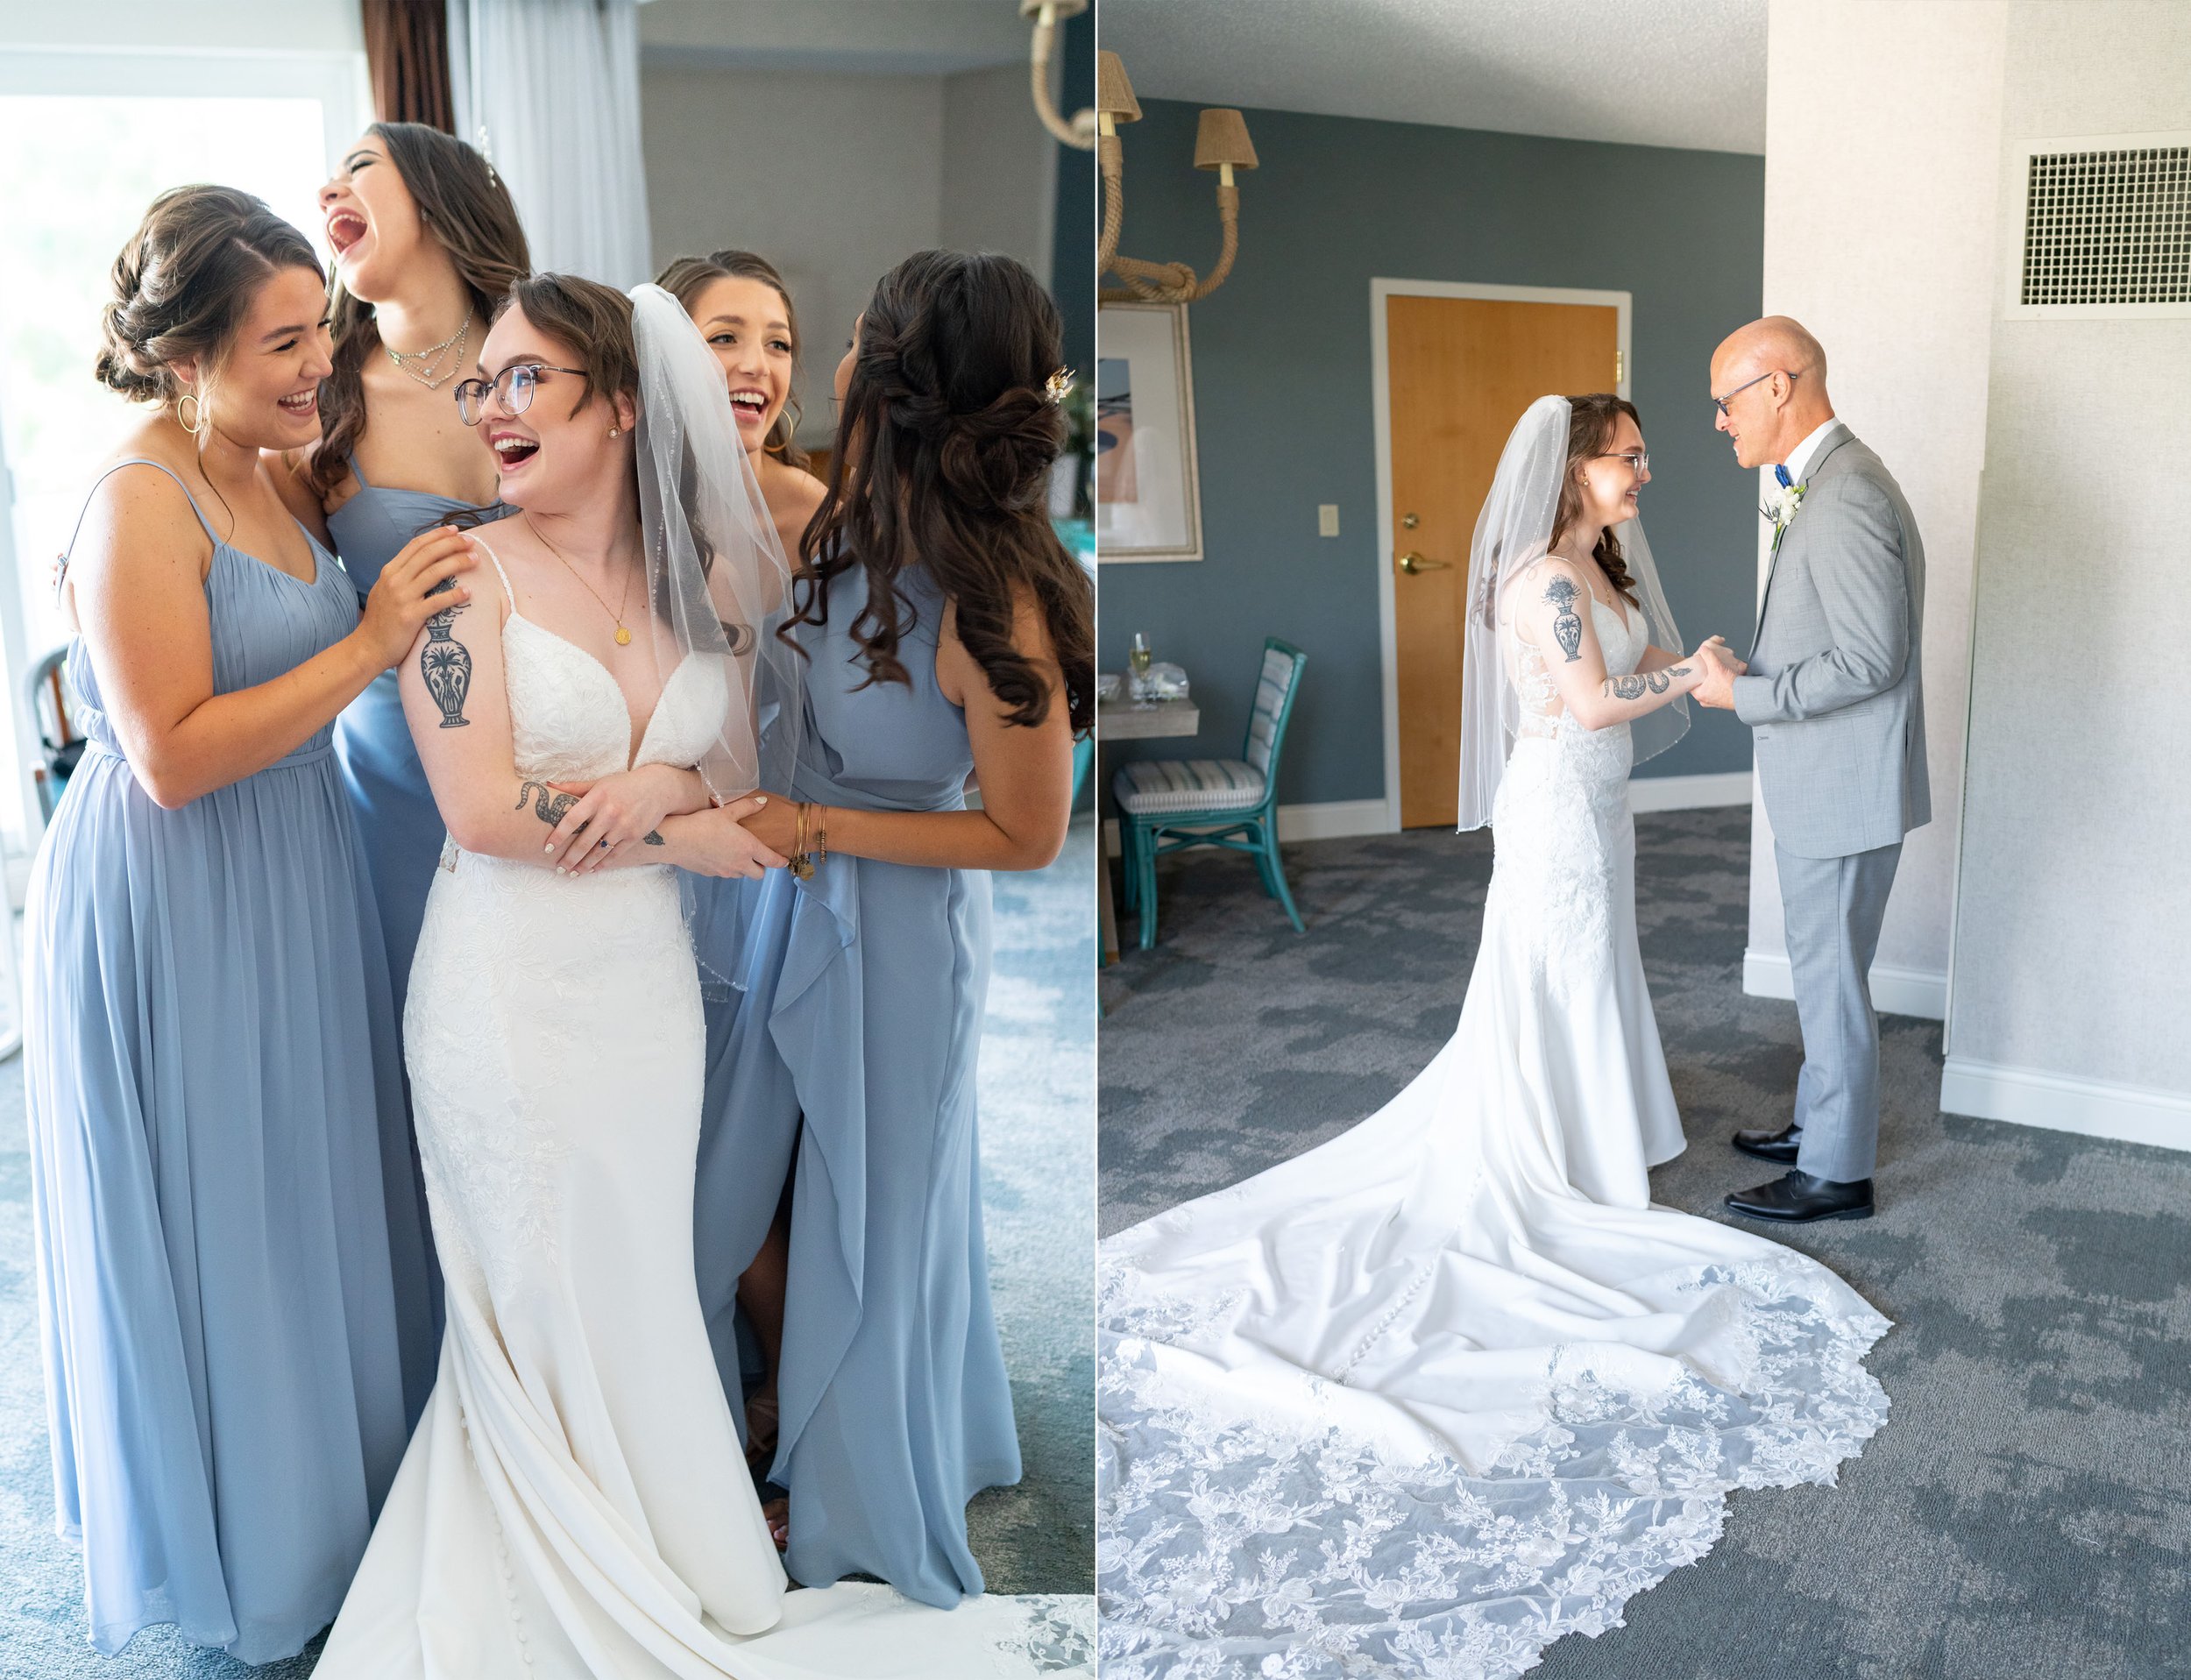 Bride with her bridesmaids and father during getting ready wedding photos